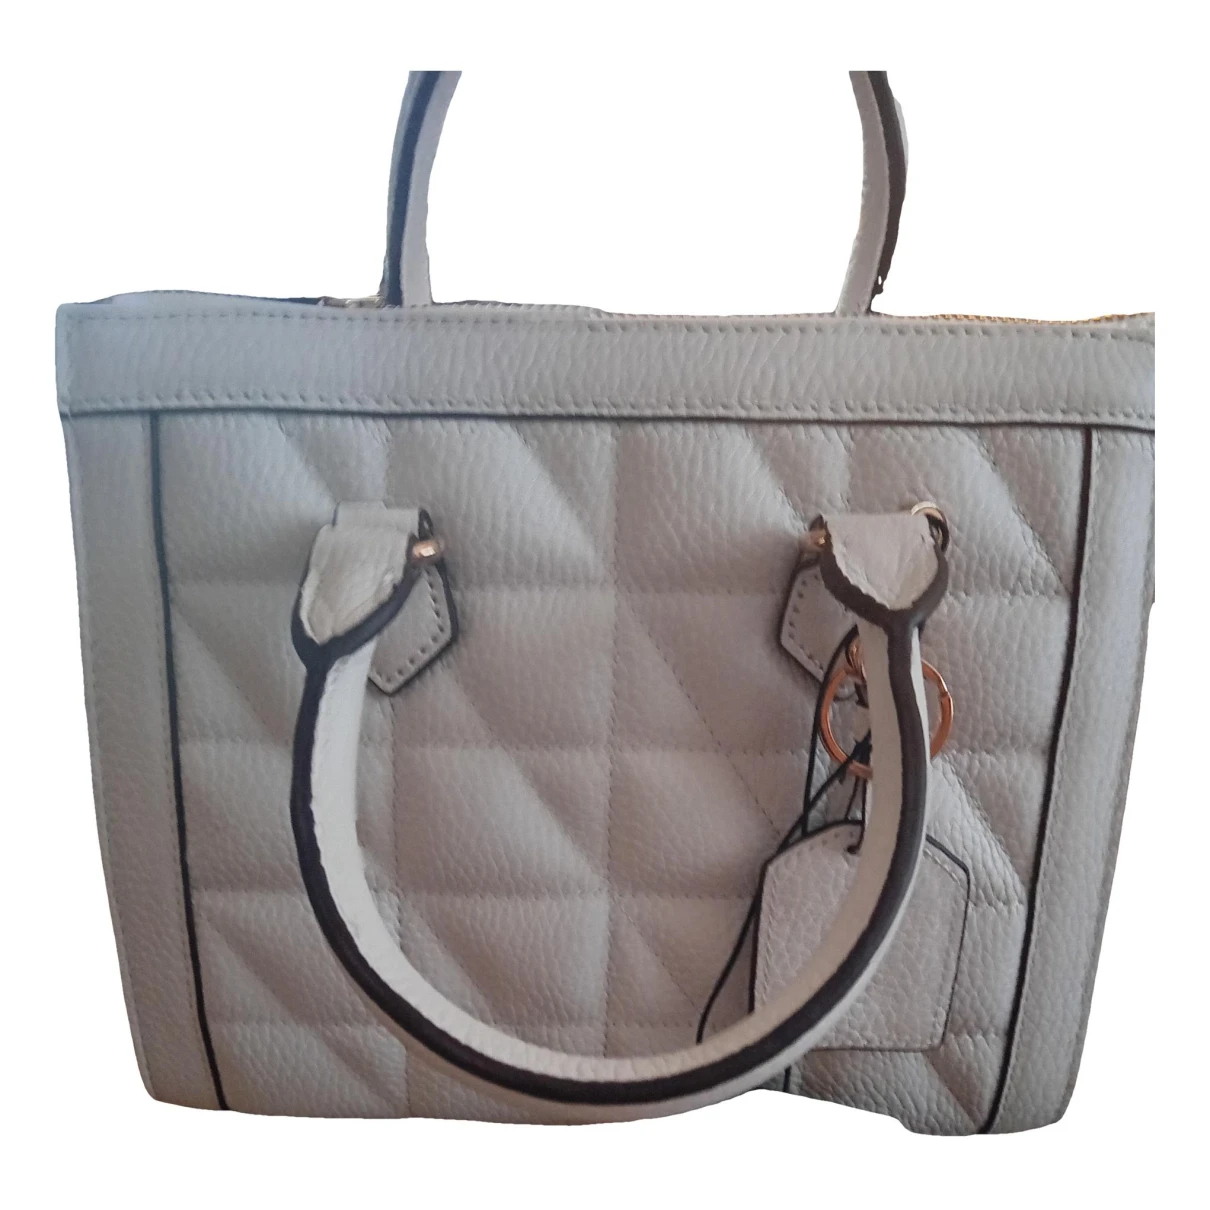 Pre-owned Geox Leather Handbag In White